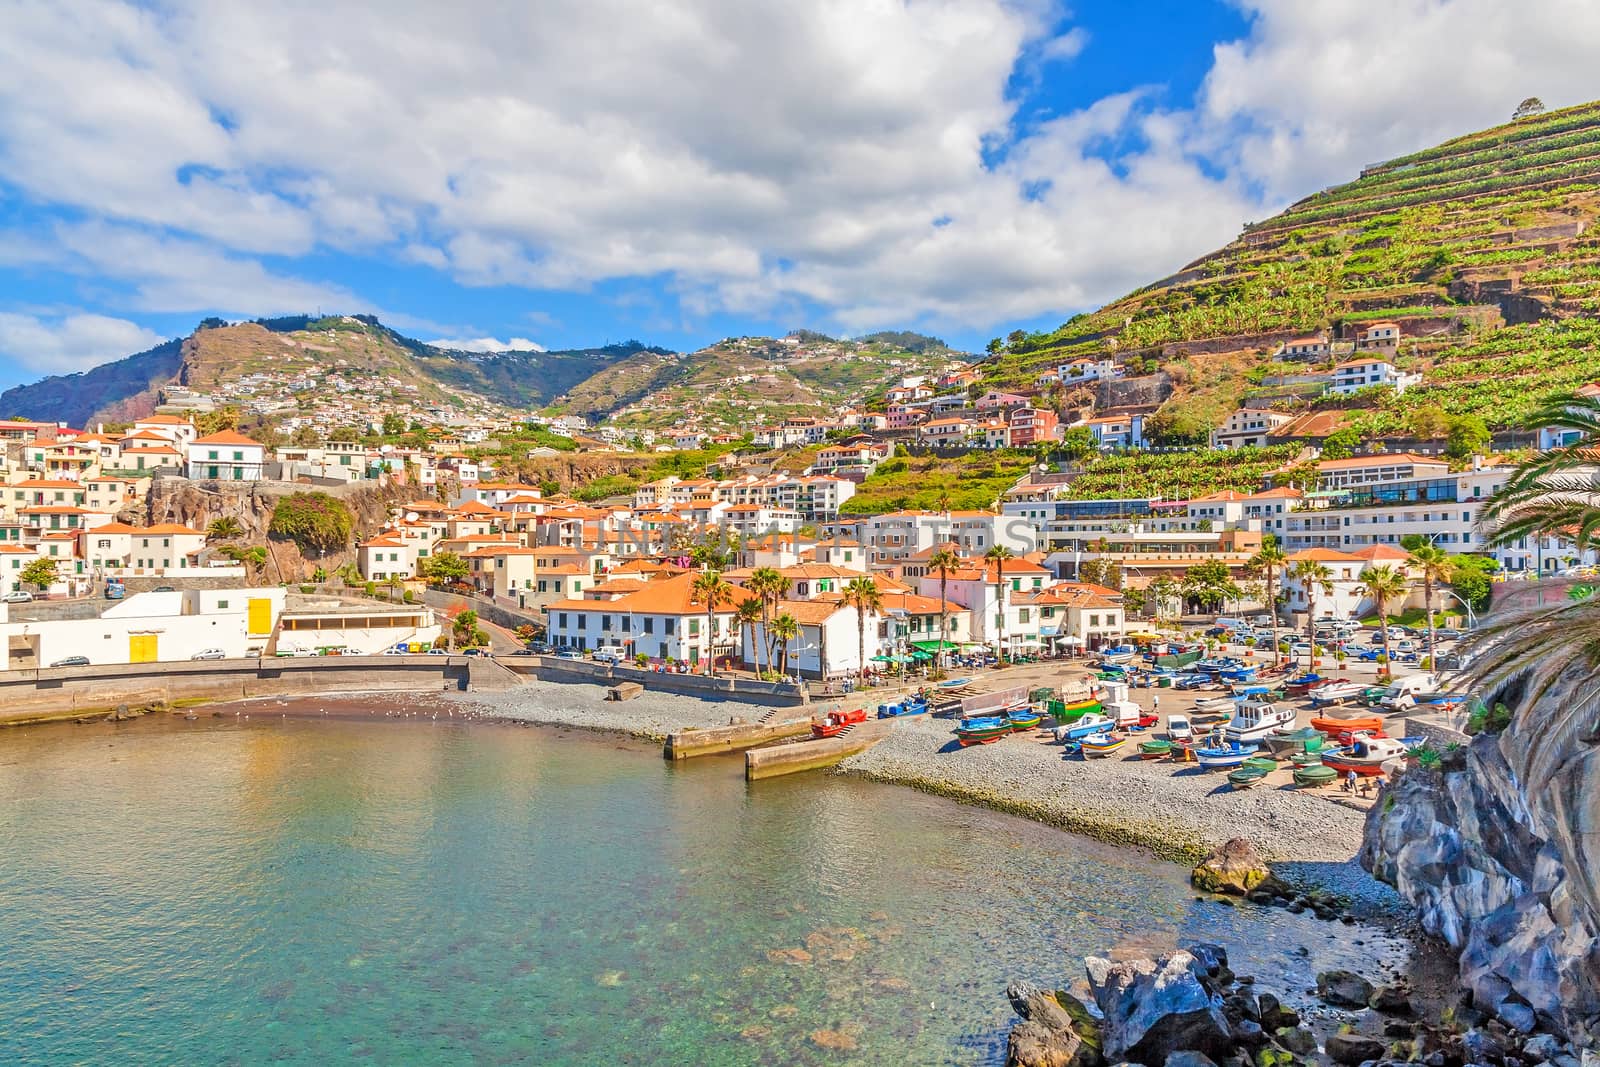 Camara de Lobos, Madeira - June 8, 2013: Port with fishing boats. The village is typical for its cat shark drying under the sun.